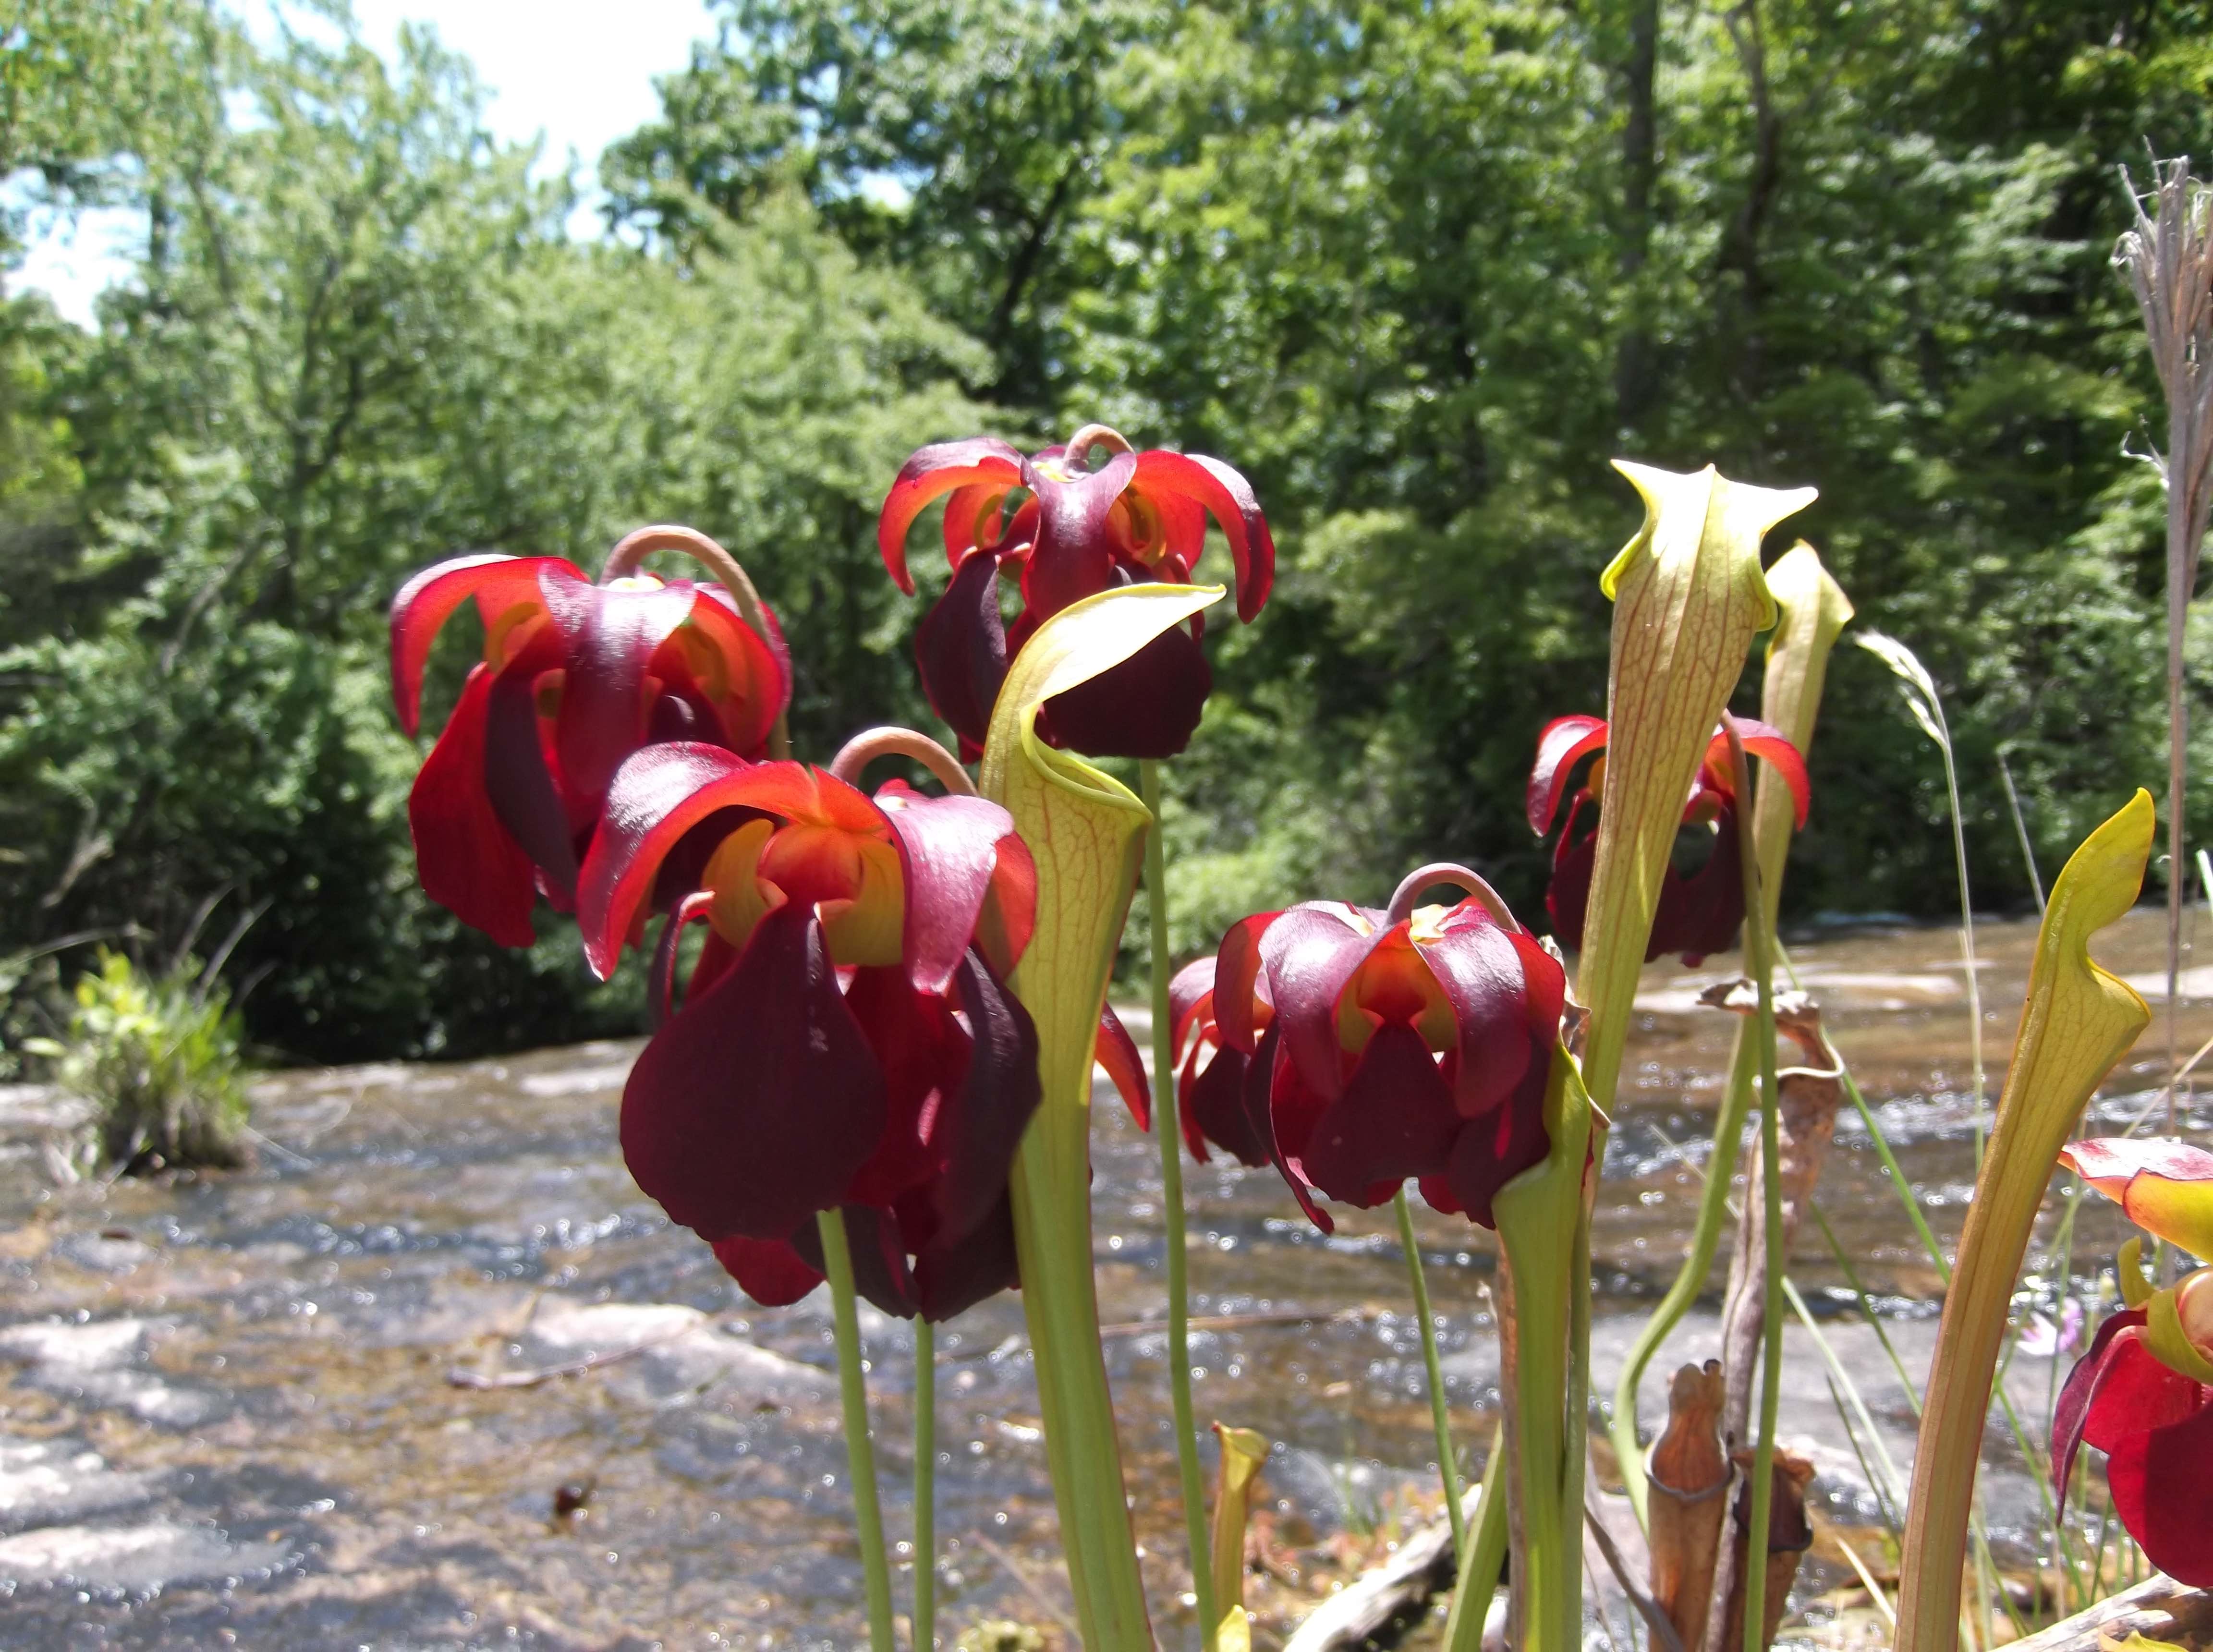 The Scientific Name is Sarracenia jonesii. You will likely hear them called Mountain Sweet Pitcherplant. This picture shows the Close-up of maroon-purple flowers and early pitchers. of Sarracenia jonesii